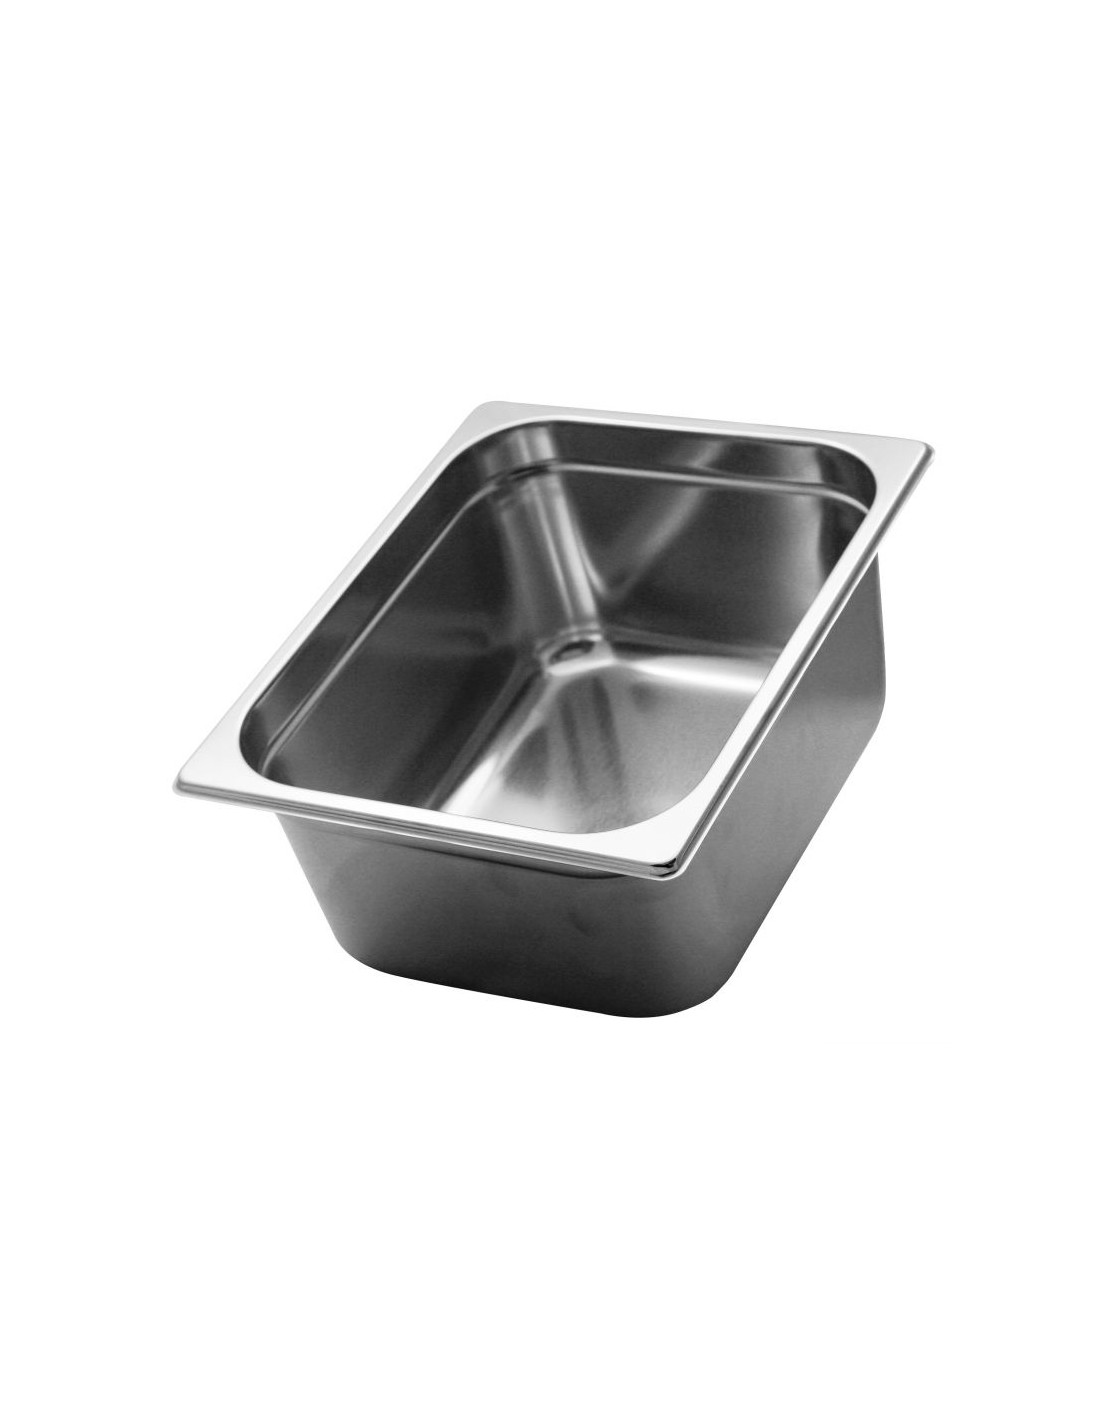 Stainless steel gastronorm containers 1/2 H. 15 cm - Capacity 9.9 liters - Dimensions 32.5 x 26.5 cm